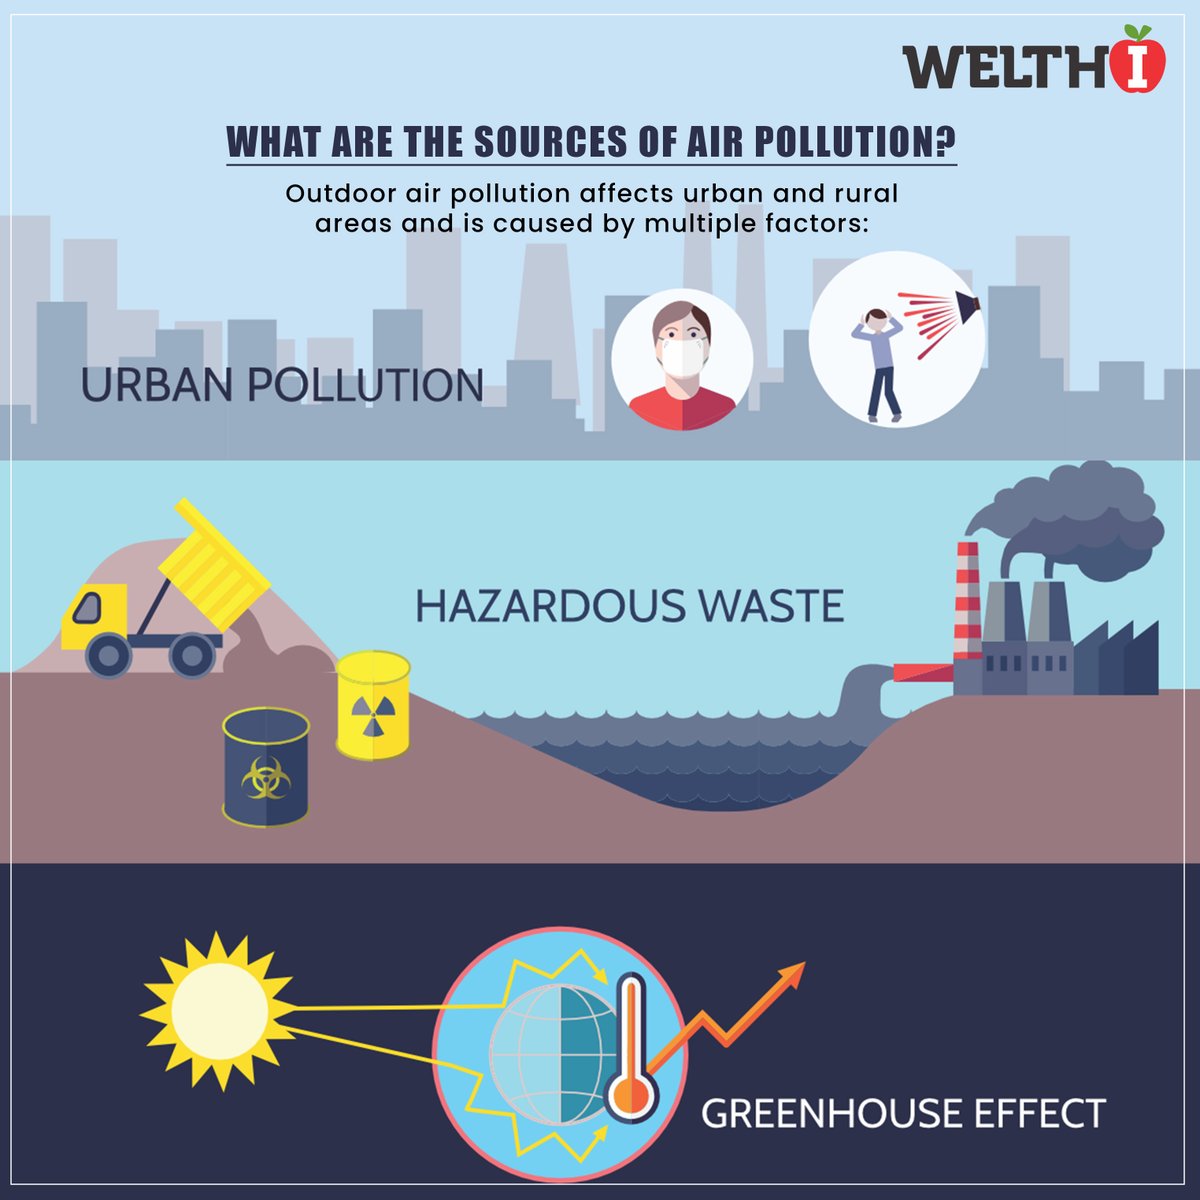 What are the Sources of Air Pollution
#welthi #healthy #airpollution  #breathe #breatheair #greenhouseeffect #hazardouswaste #beatairpollution #indoorairpollution #stopairpollution #airpollutionmask #airpollutionawareness #airpollutioncontrol #noairpollution #airpollutionkills